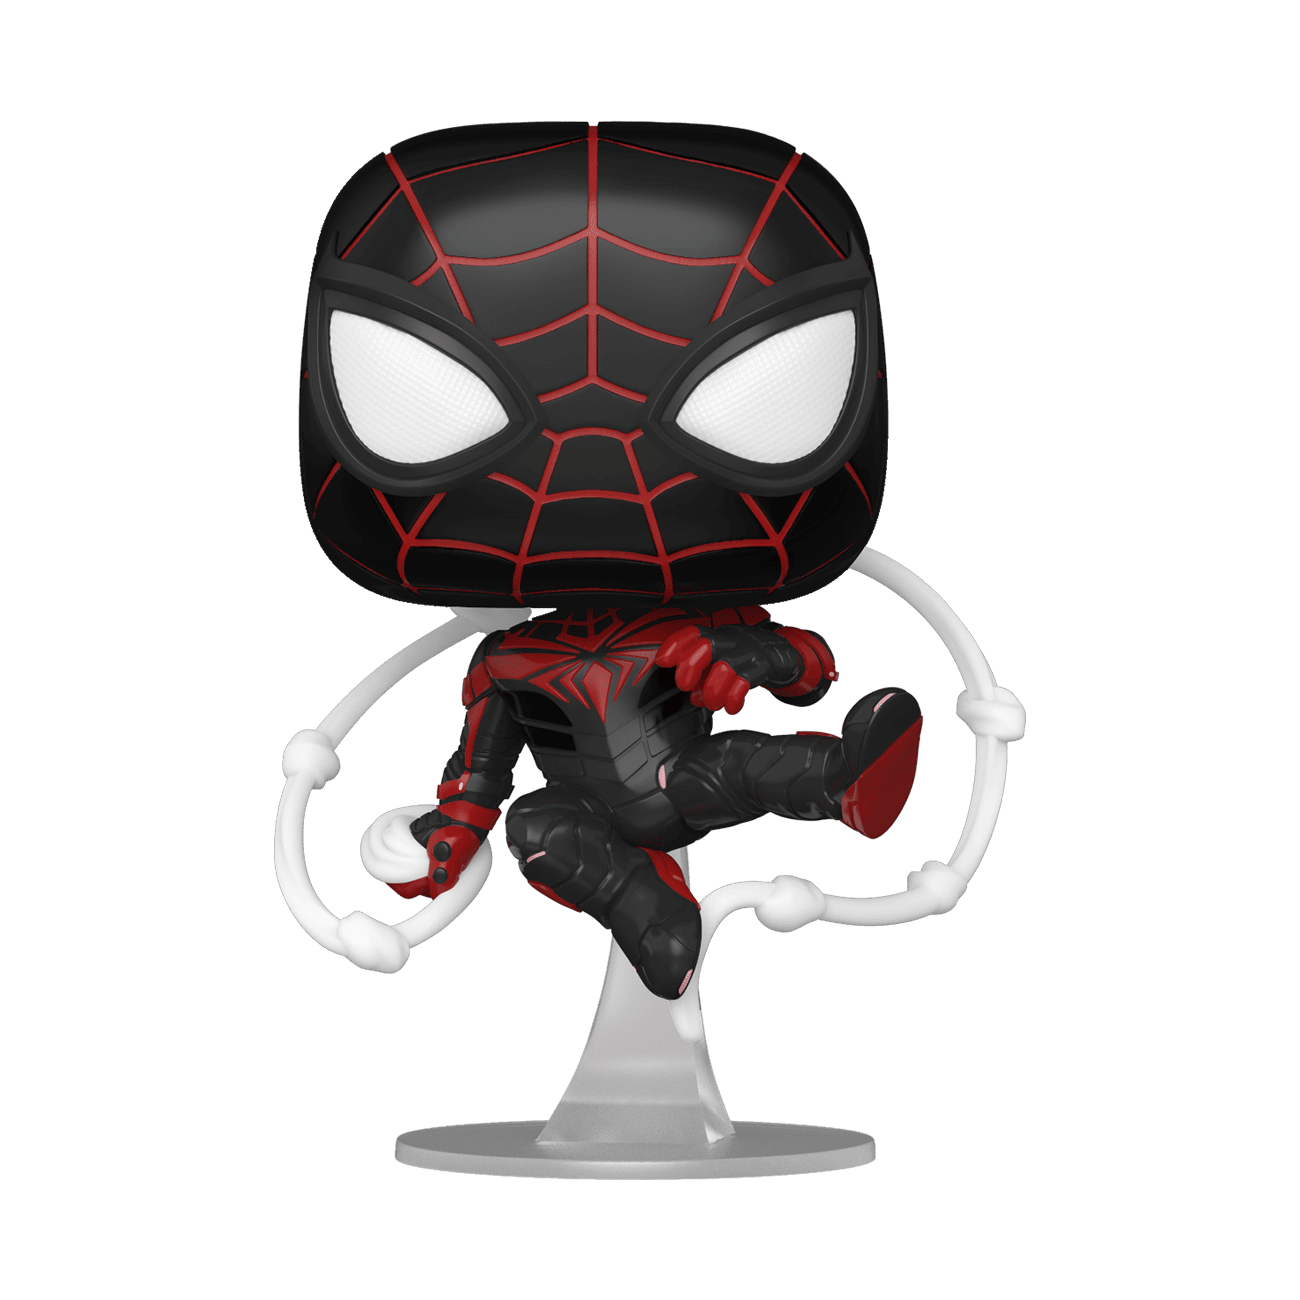 Buy Pop! Miles Morales in Advanced Tech Suit at Funko.